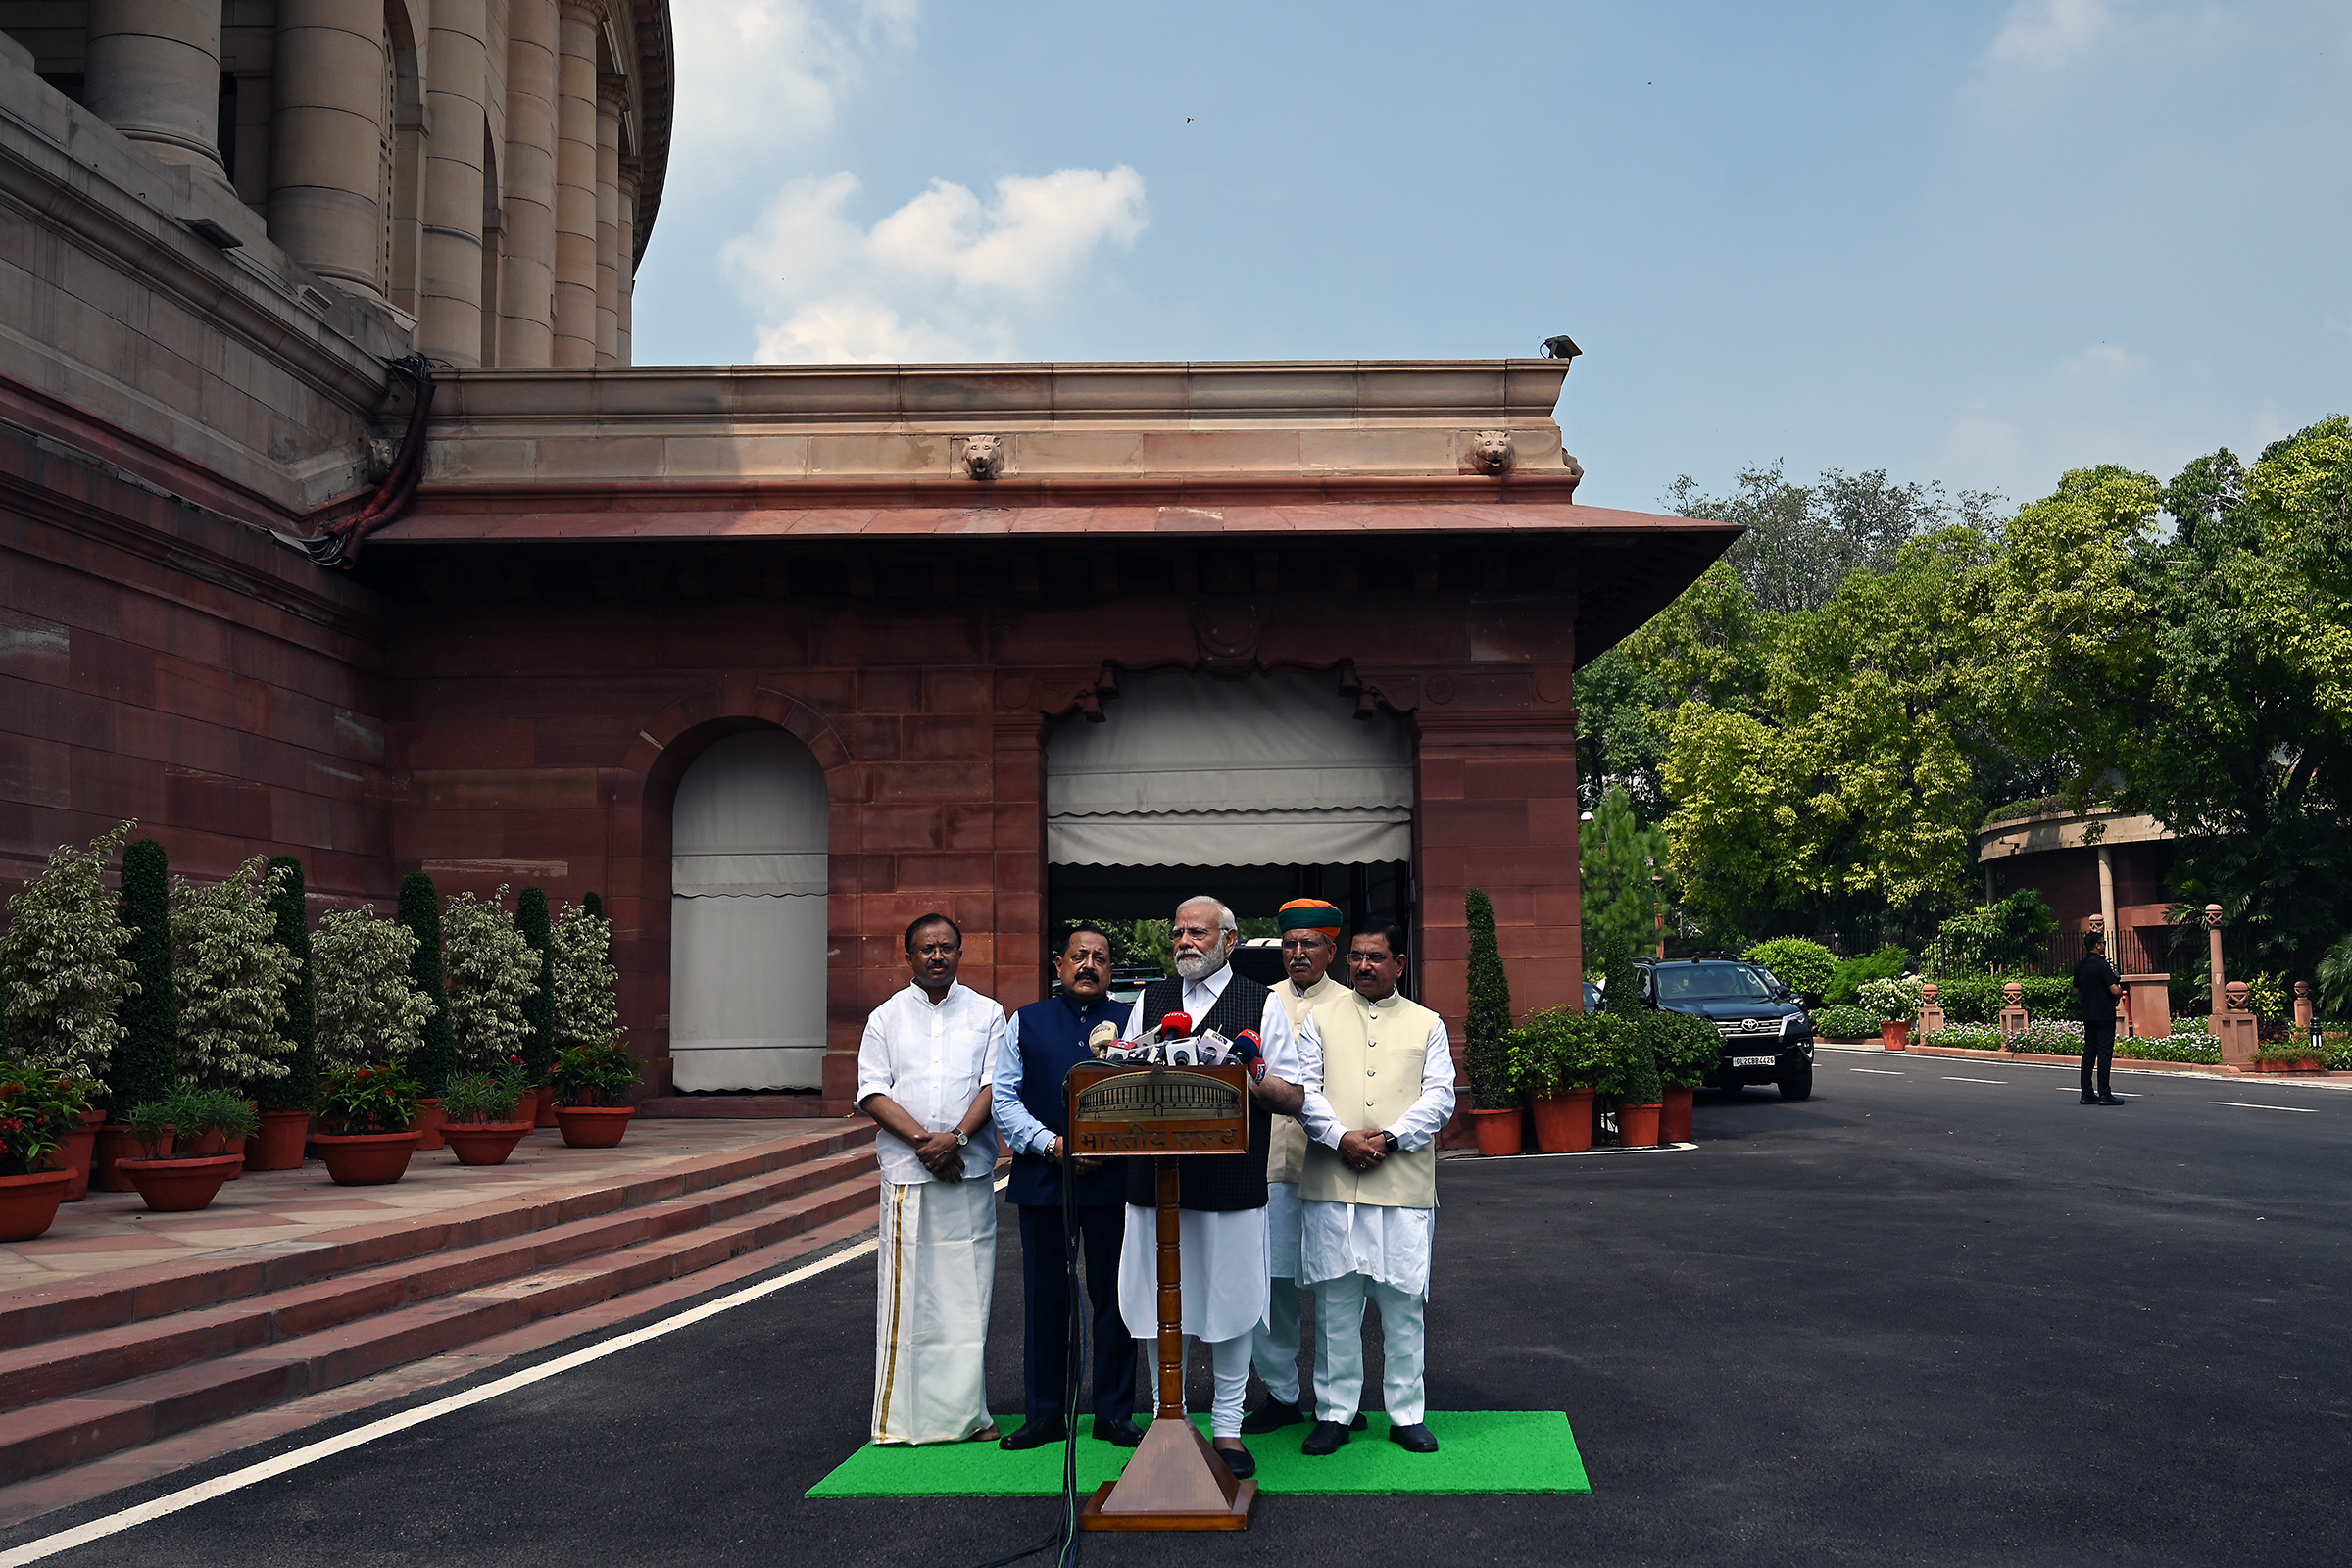 Narendra Modi, India's prime minister, speaks to members of the media ahead of the monsoon session of Parliament in New Delhi on July 20. A video of two women being paraded naked by a group of men in Manipur has elicited first public comments from Modi regarding the ethnic violence that has engulfed the relatively remote Indian state.